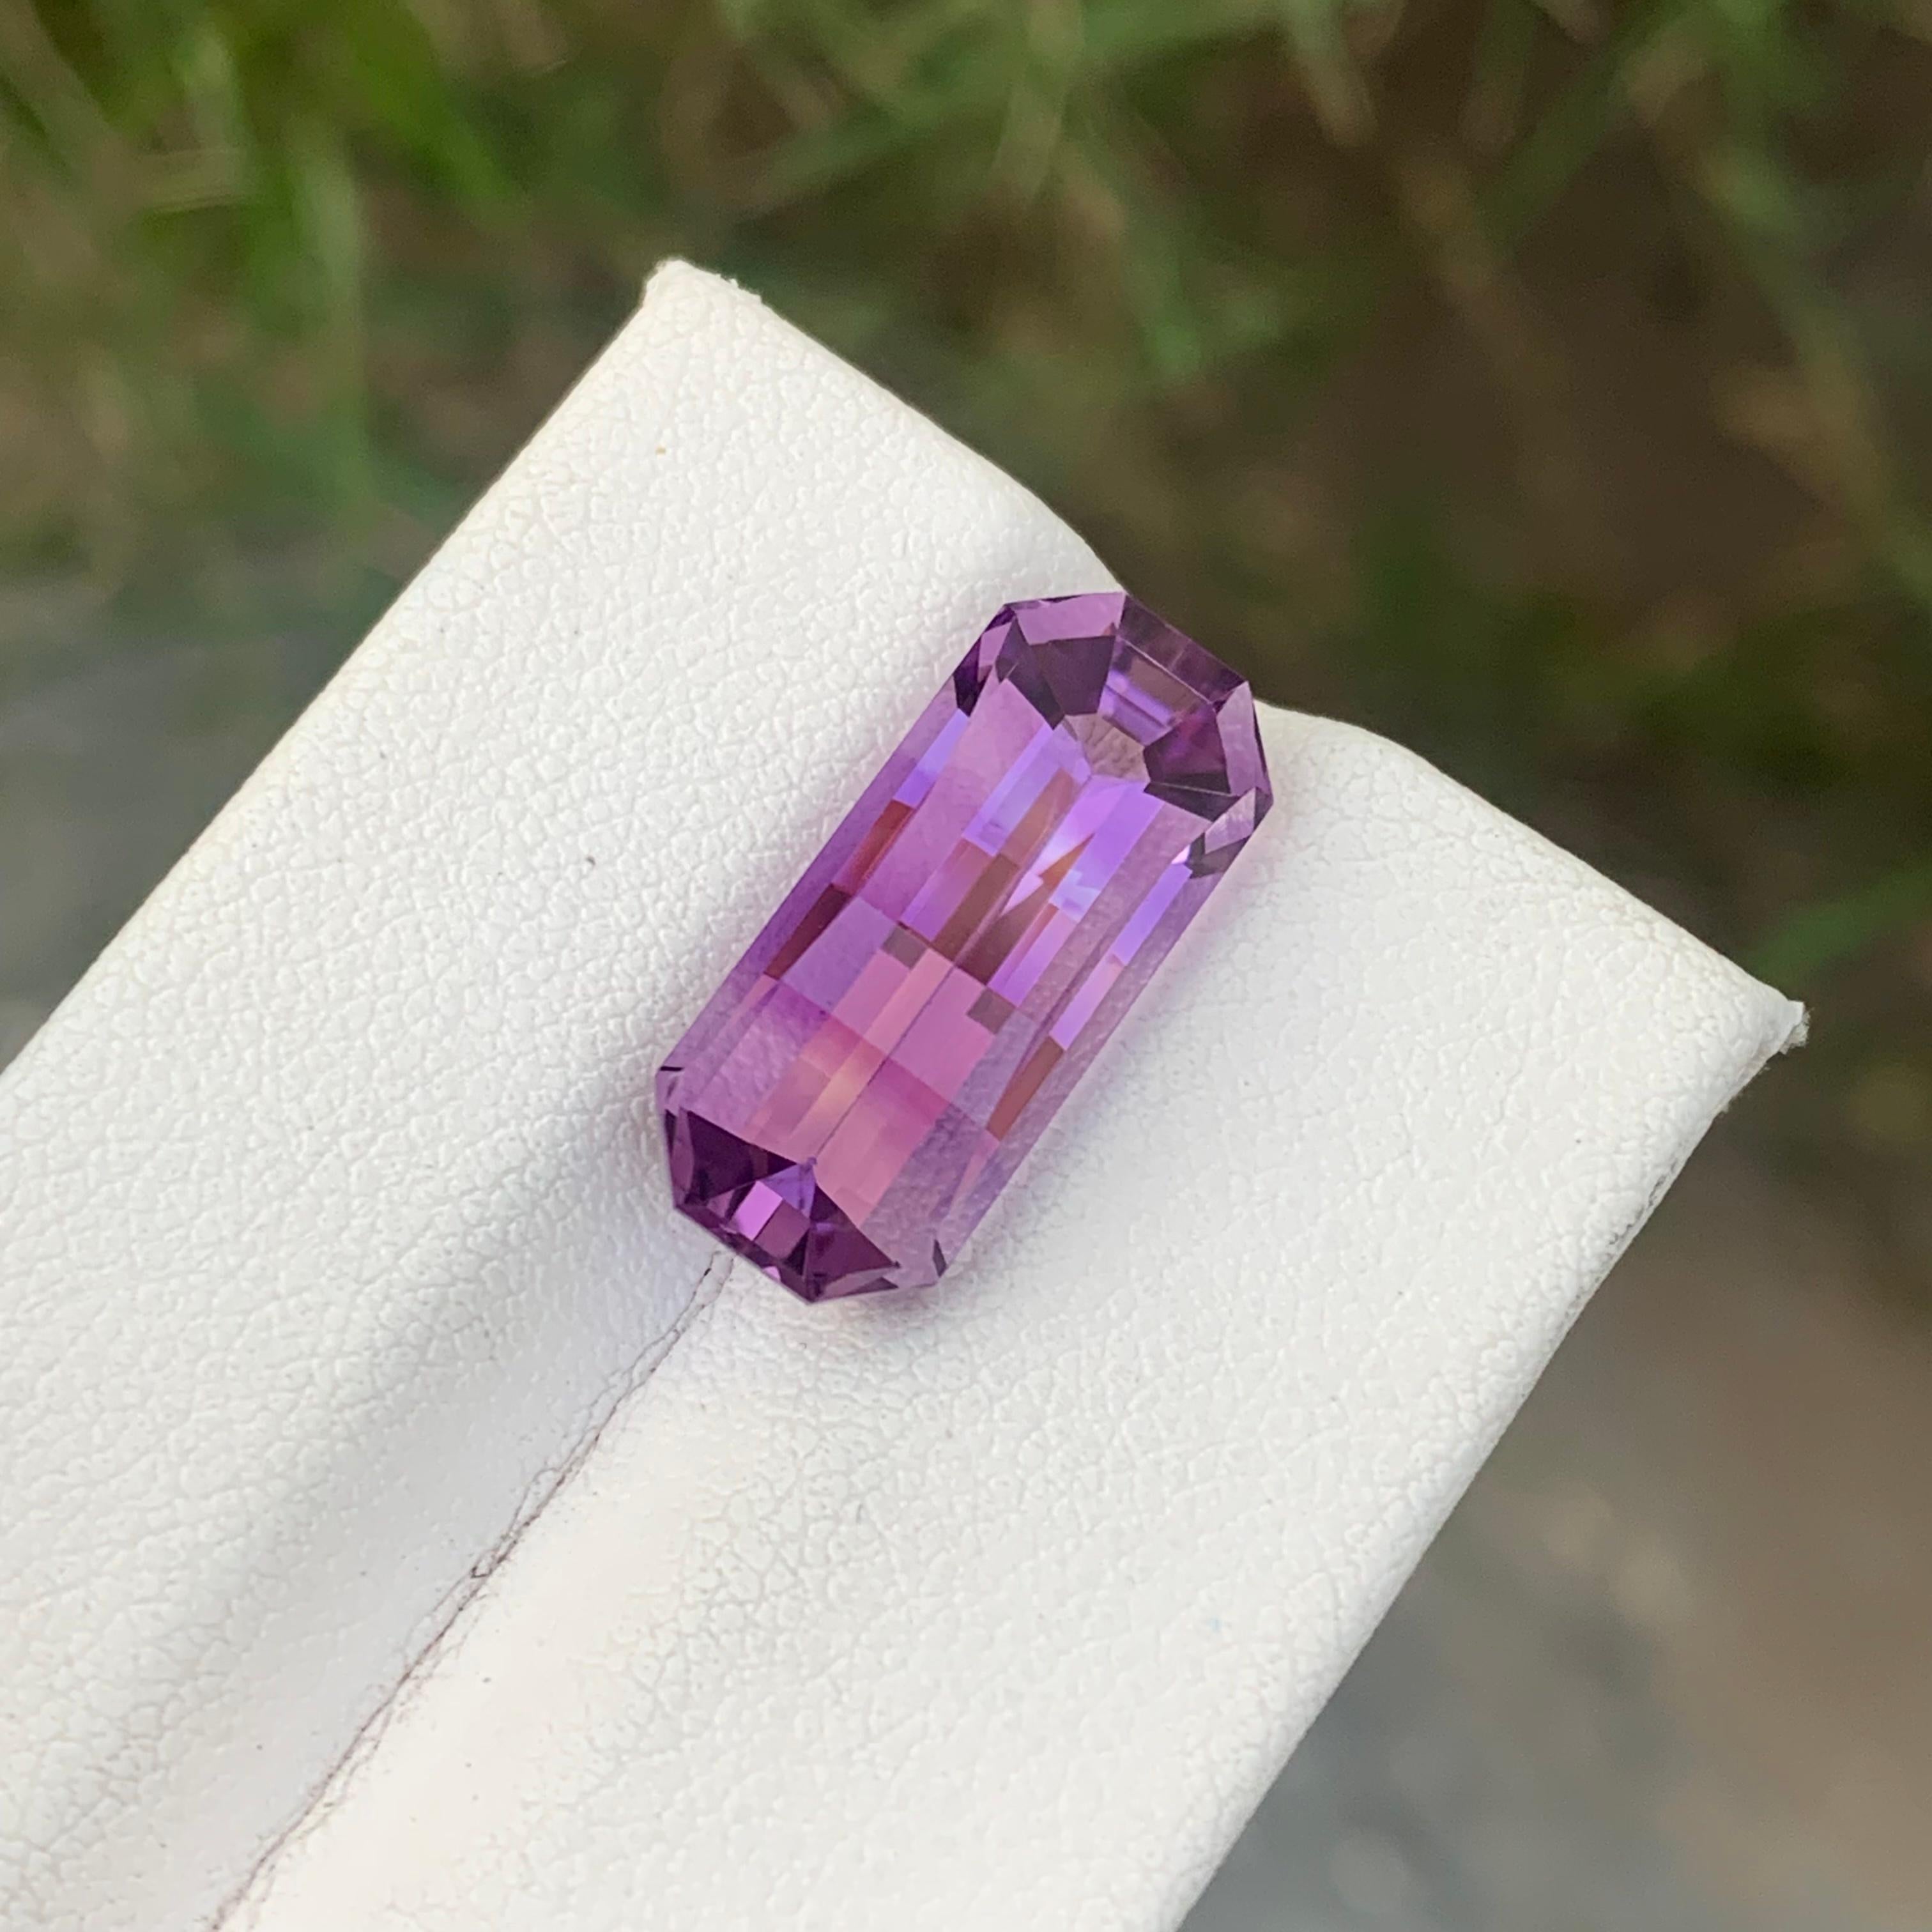 Emerald Cut 8.25cts Natural Loose Amethyst Gemstone Pixel Pixelated Cut From Brazil Mine For Sale